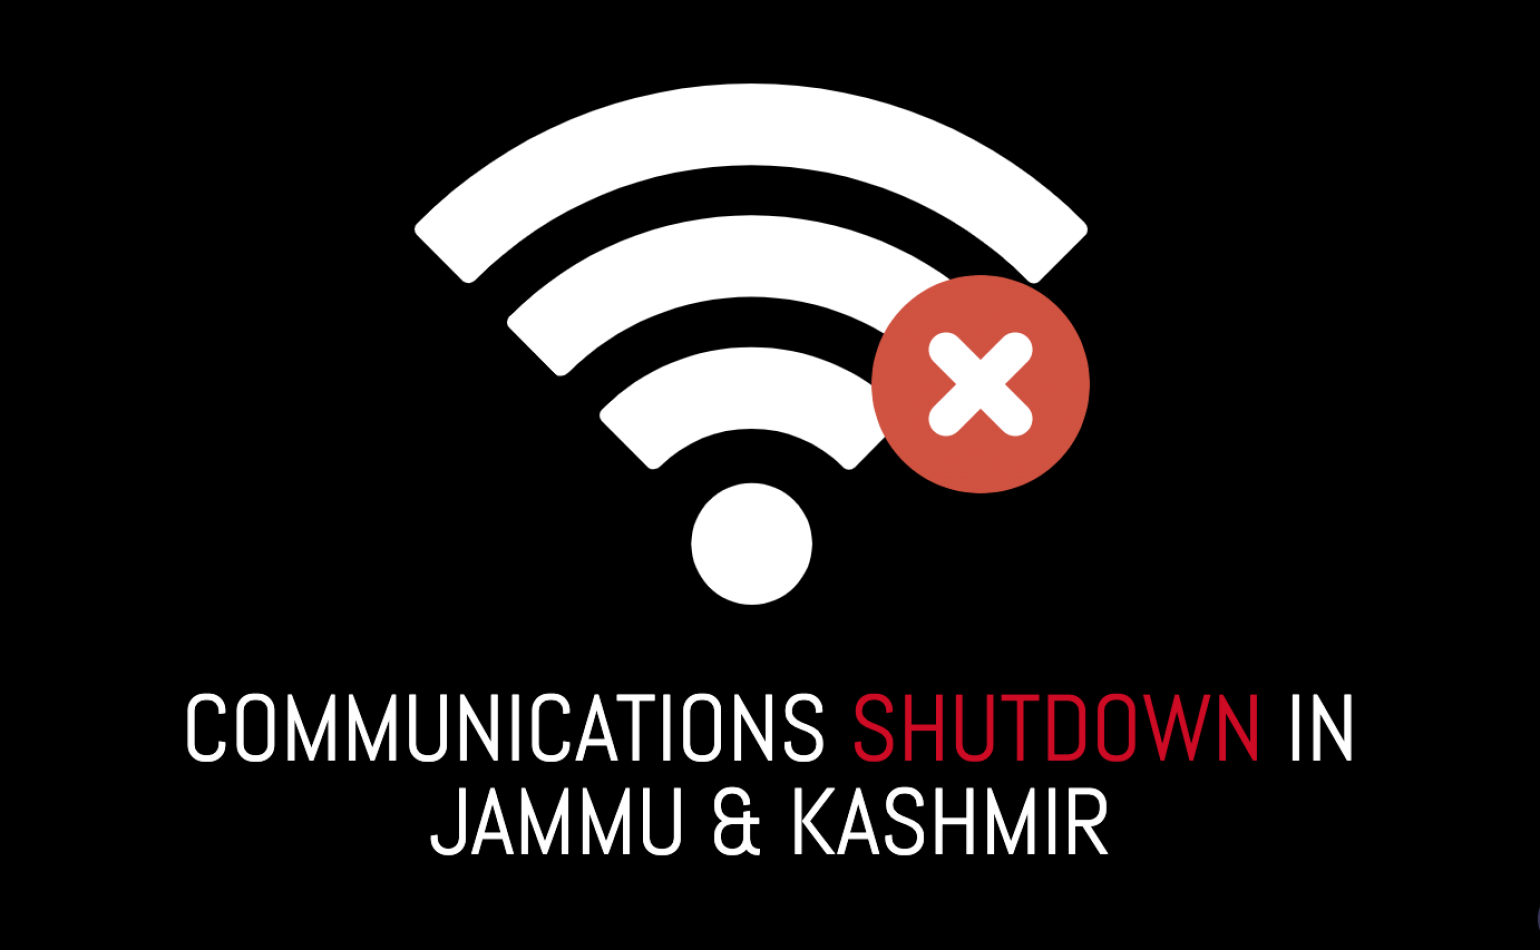 Association for Progressive Communications & Media Matters for Democracy condemns the shutdown of communications in Jammu & Kashmir